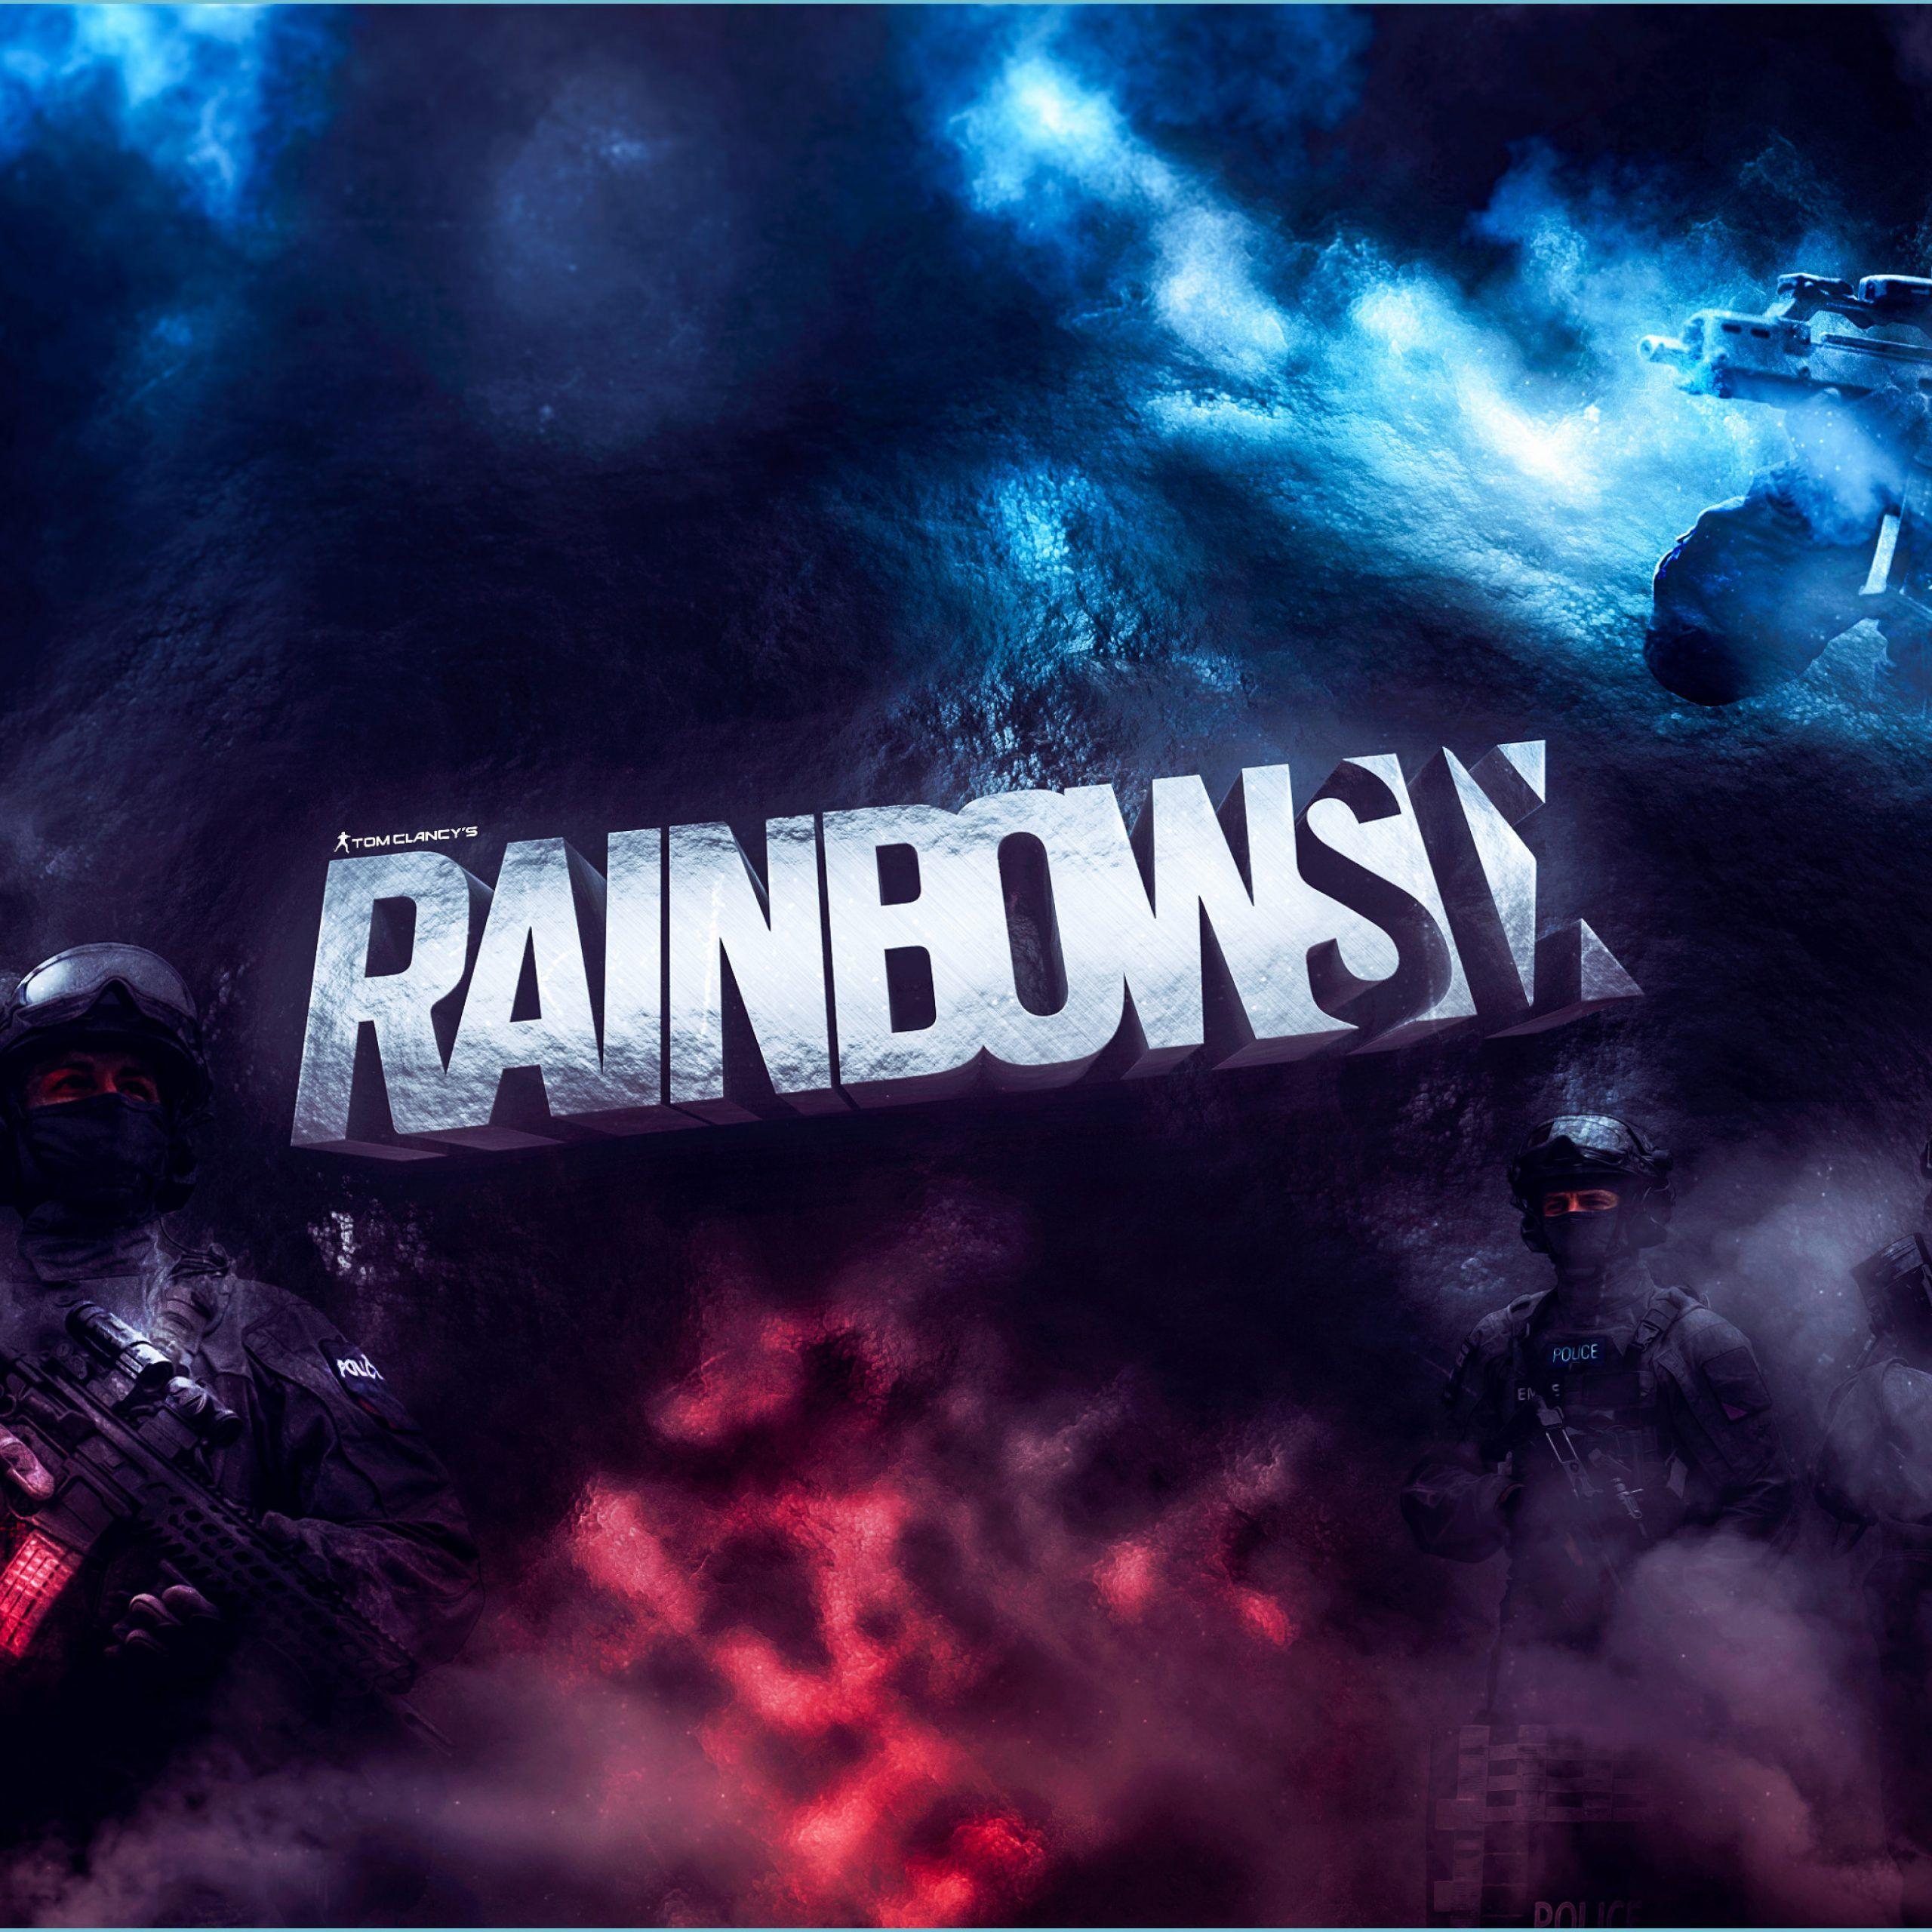 Rainbow Gaming Wallpapers - Top Free Rainbow Gaming Backgrounds ...